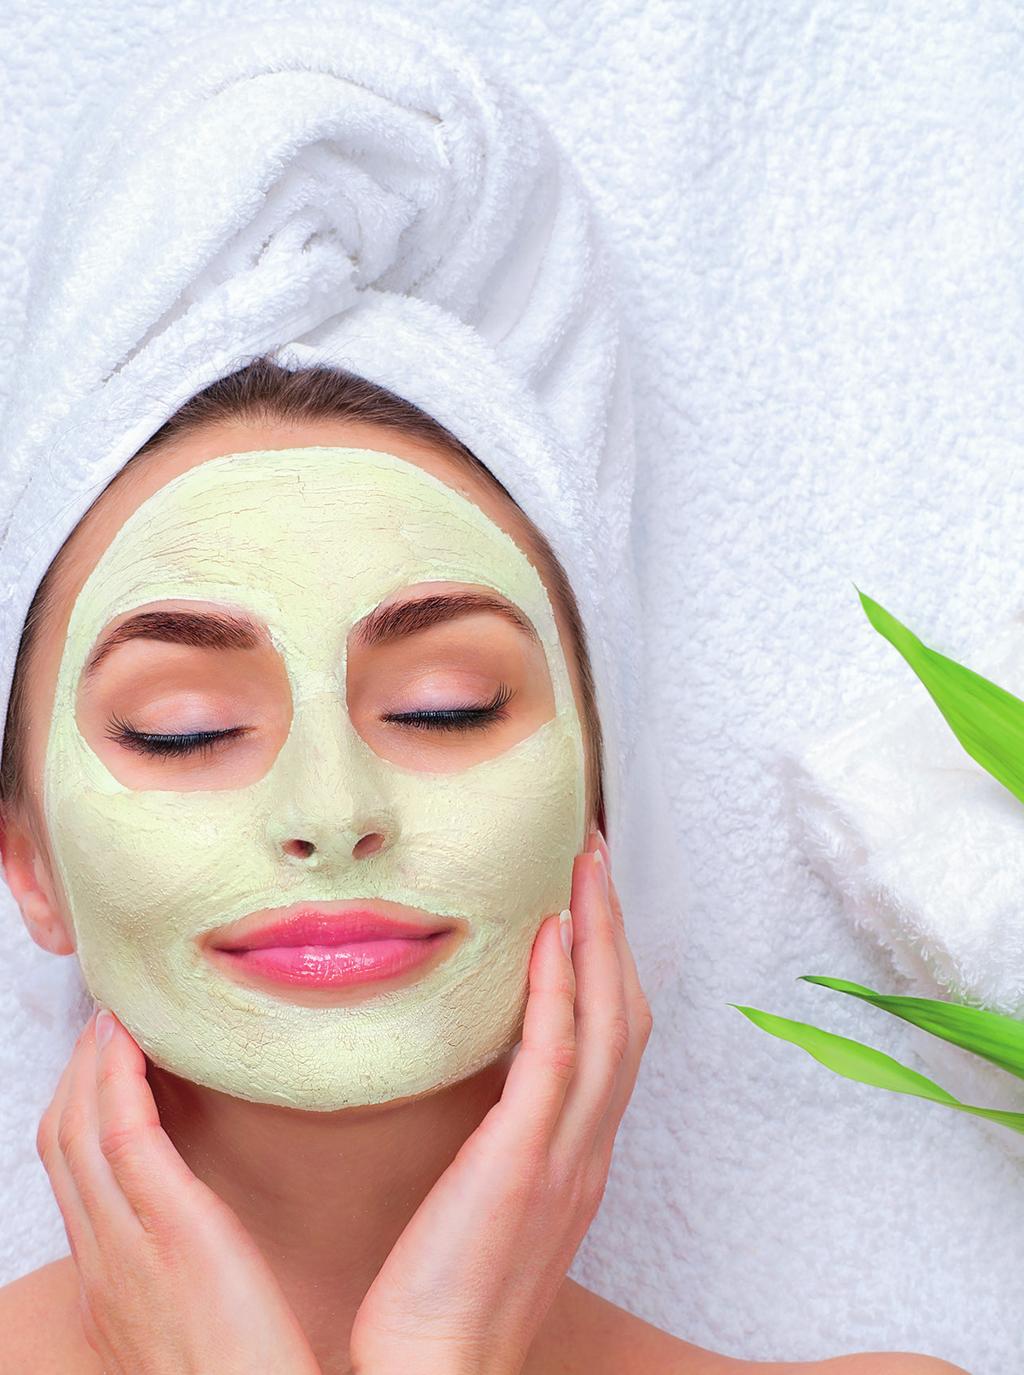 PROFESSIONAL FACIALS Medik8 Medik8 is an award-winning skincare brand sold exclusively by skincare experts.